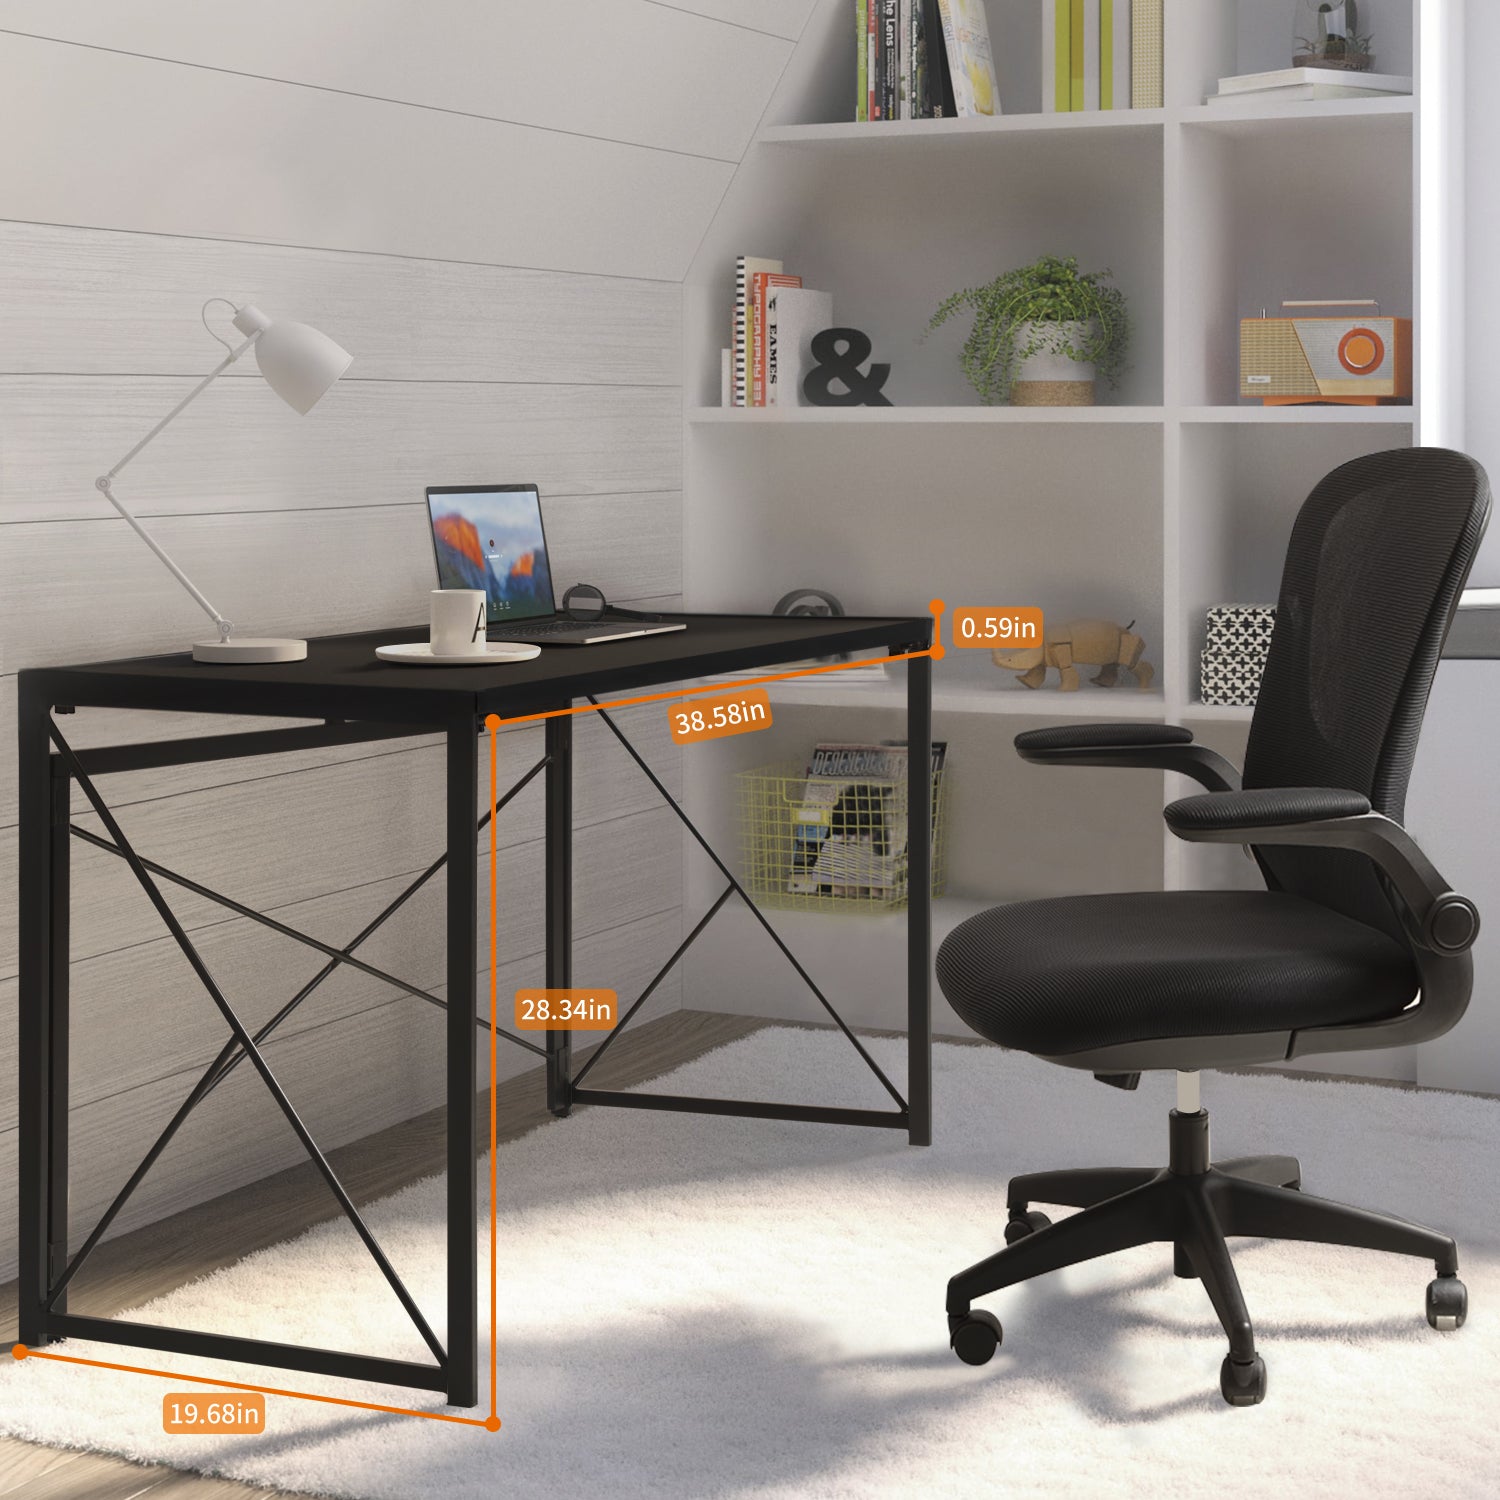 Kingso Small Computer Desk 39 Study Writing Table For Home Office - 39 Inches Writing Desk for Office